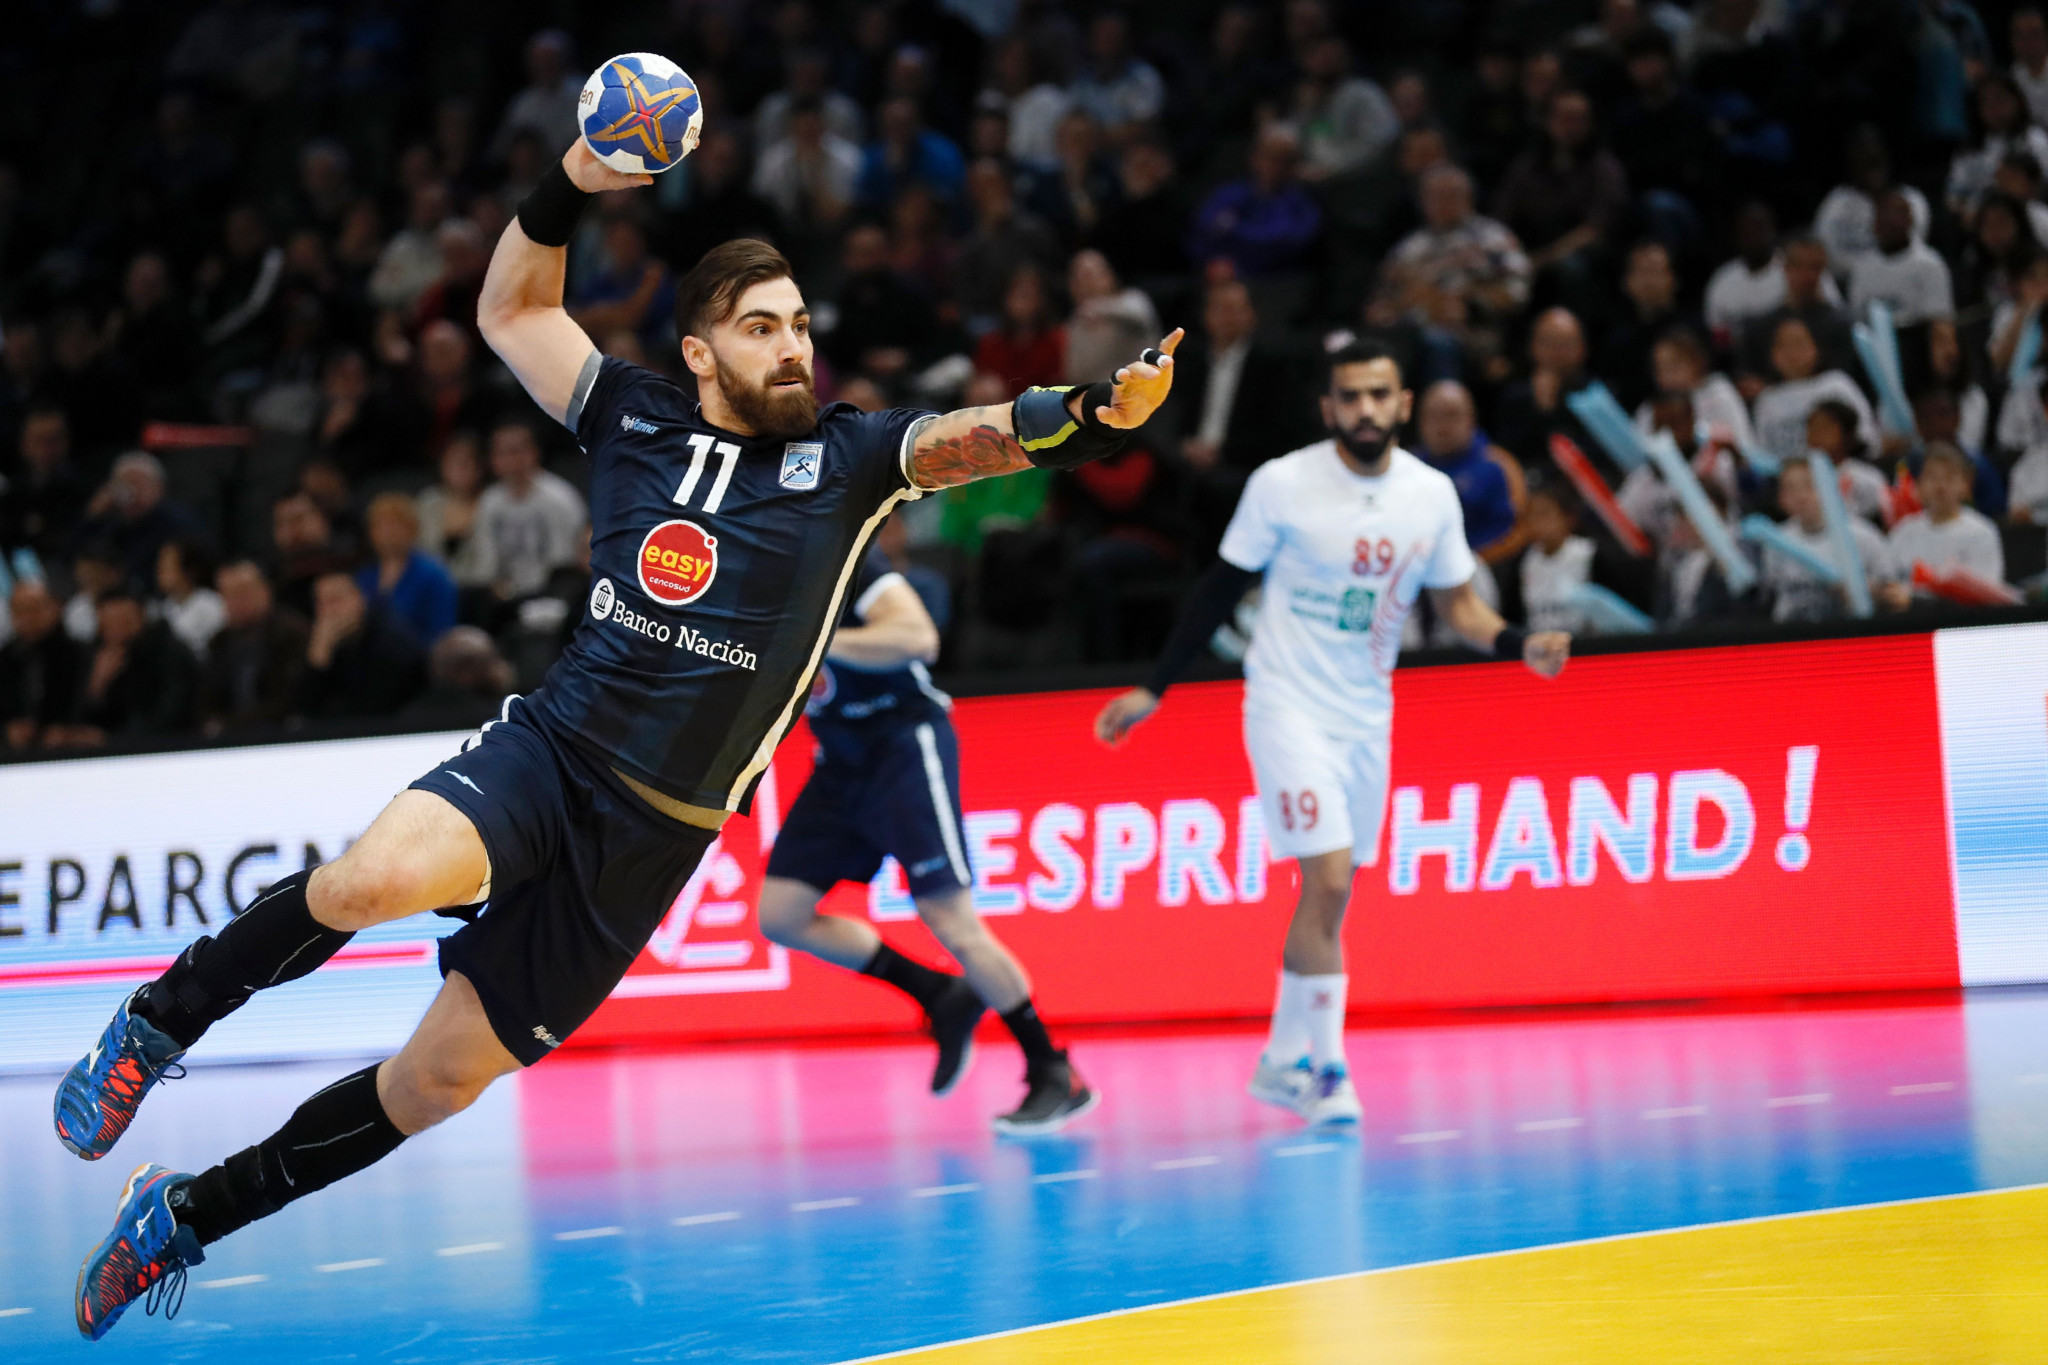 Argentina beat Puerto Rico 42-18 today at the 2018 Pan American Men’s Handball Championship in Nuuk in Greenland ©Getty Images